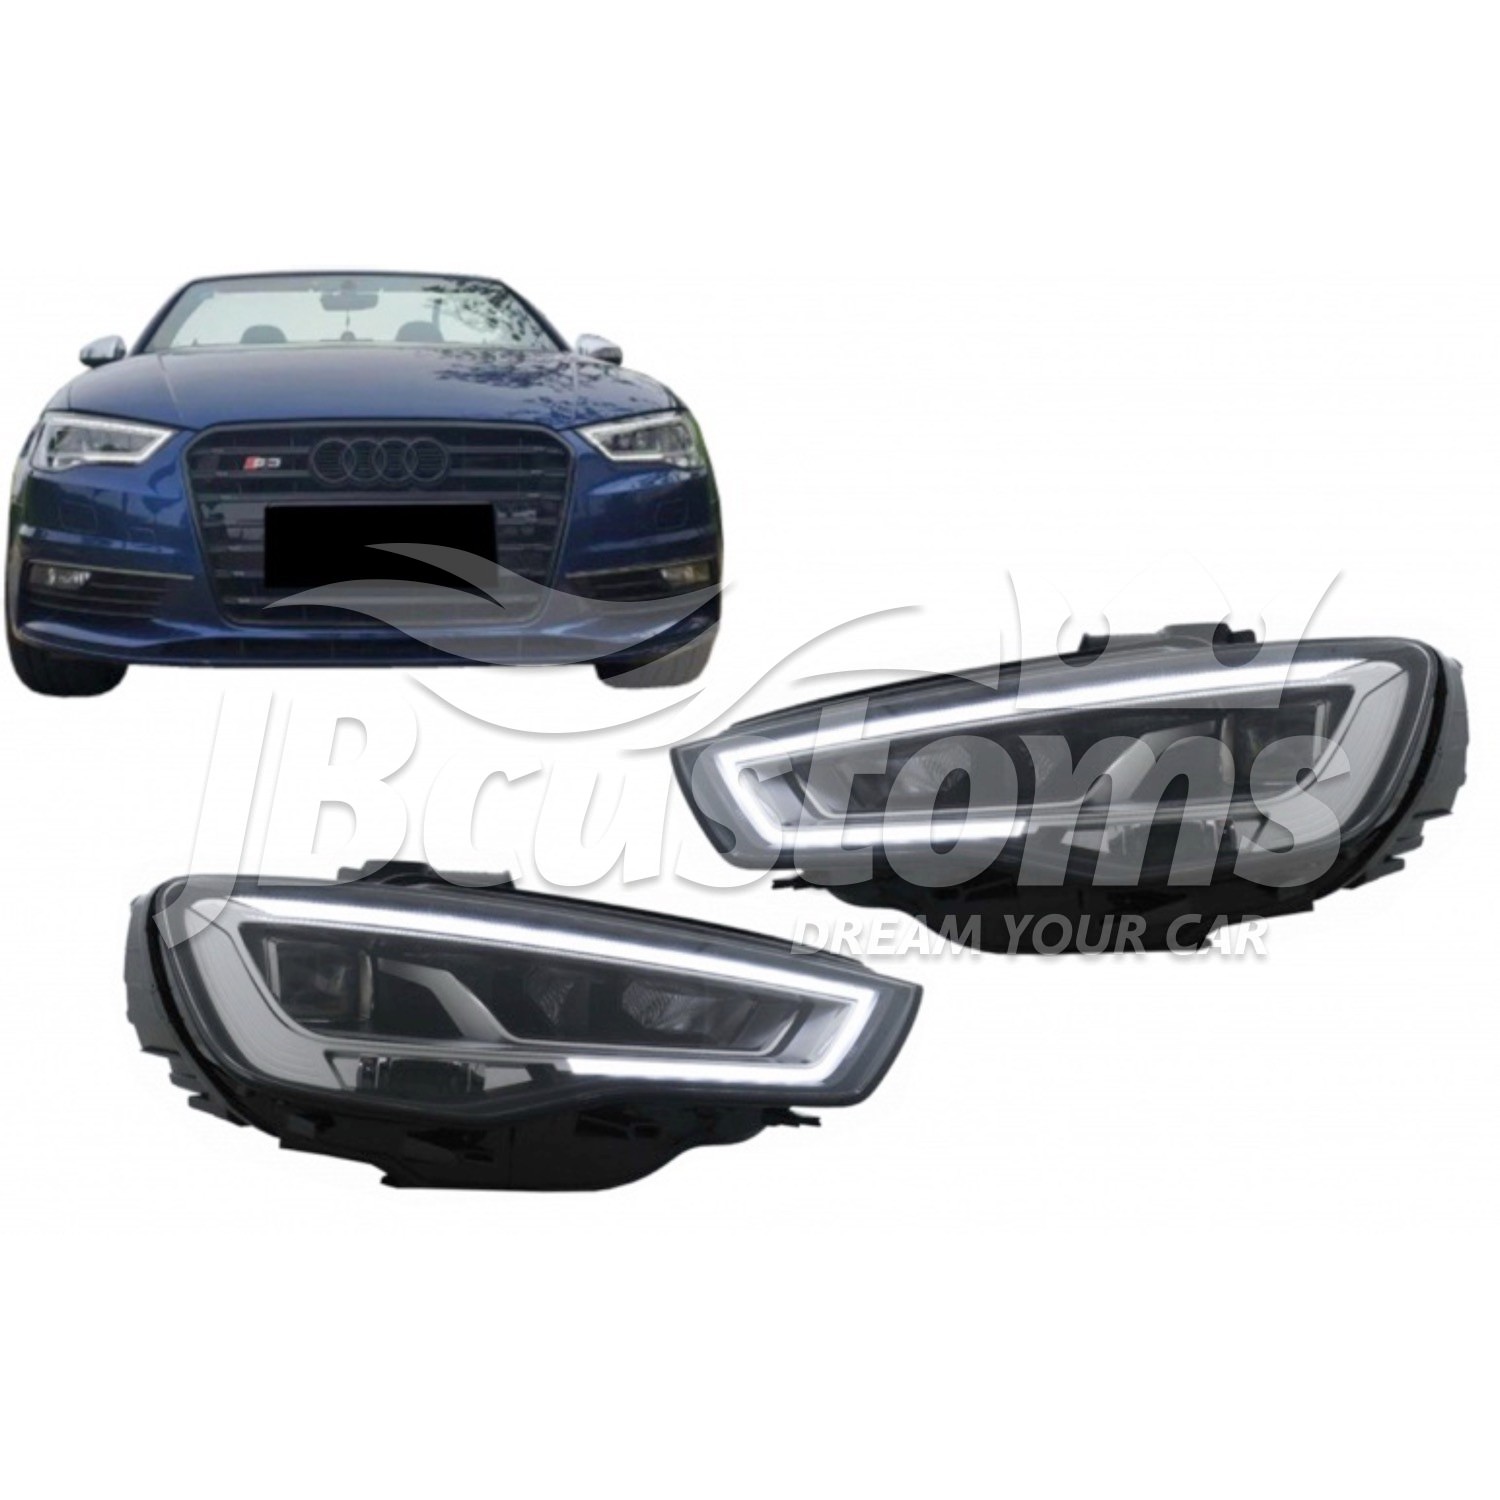 Smag frekvens Underholde JBCustoms - Full LED Headlights suitable for Audi A3 8V Pre-Facelift (2013- 2016) Upgrade for Halogen with Sequential Dynamic Turning Lights LHD